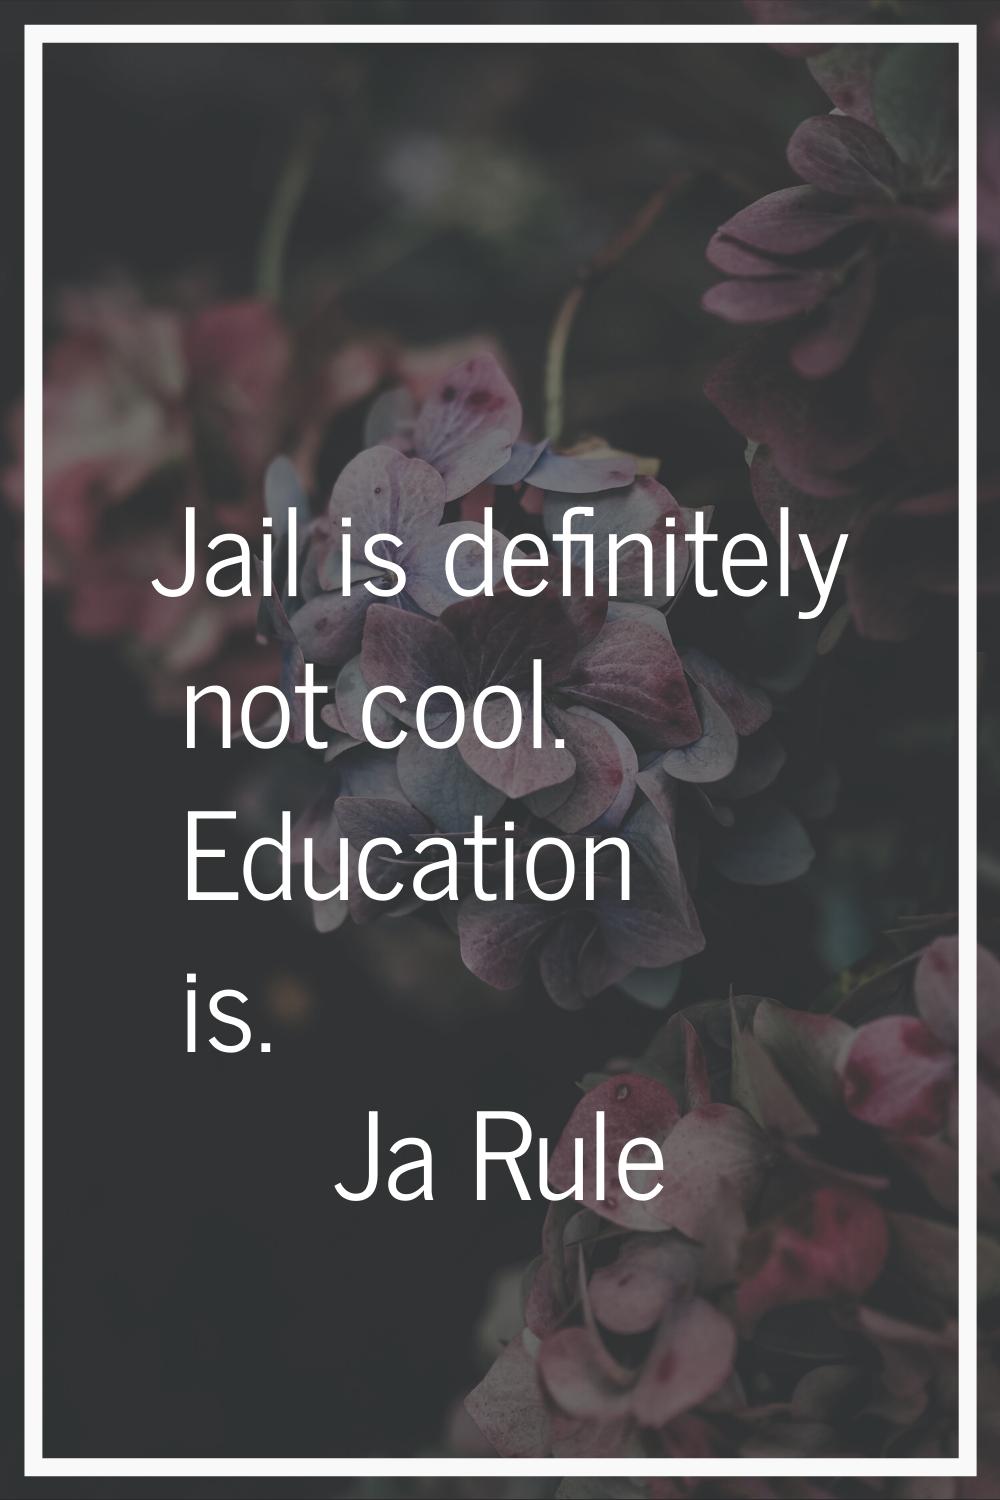 Jail is definitely not cool. Education is.